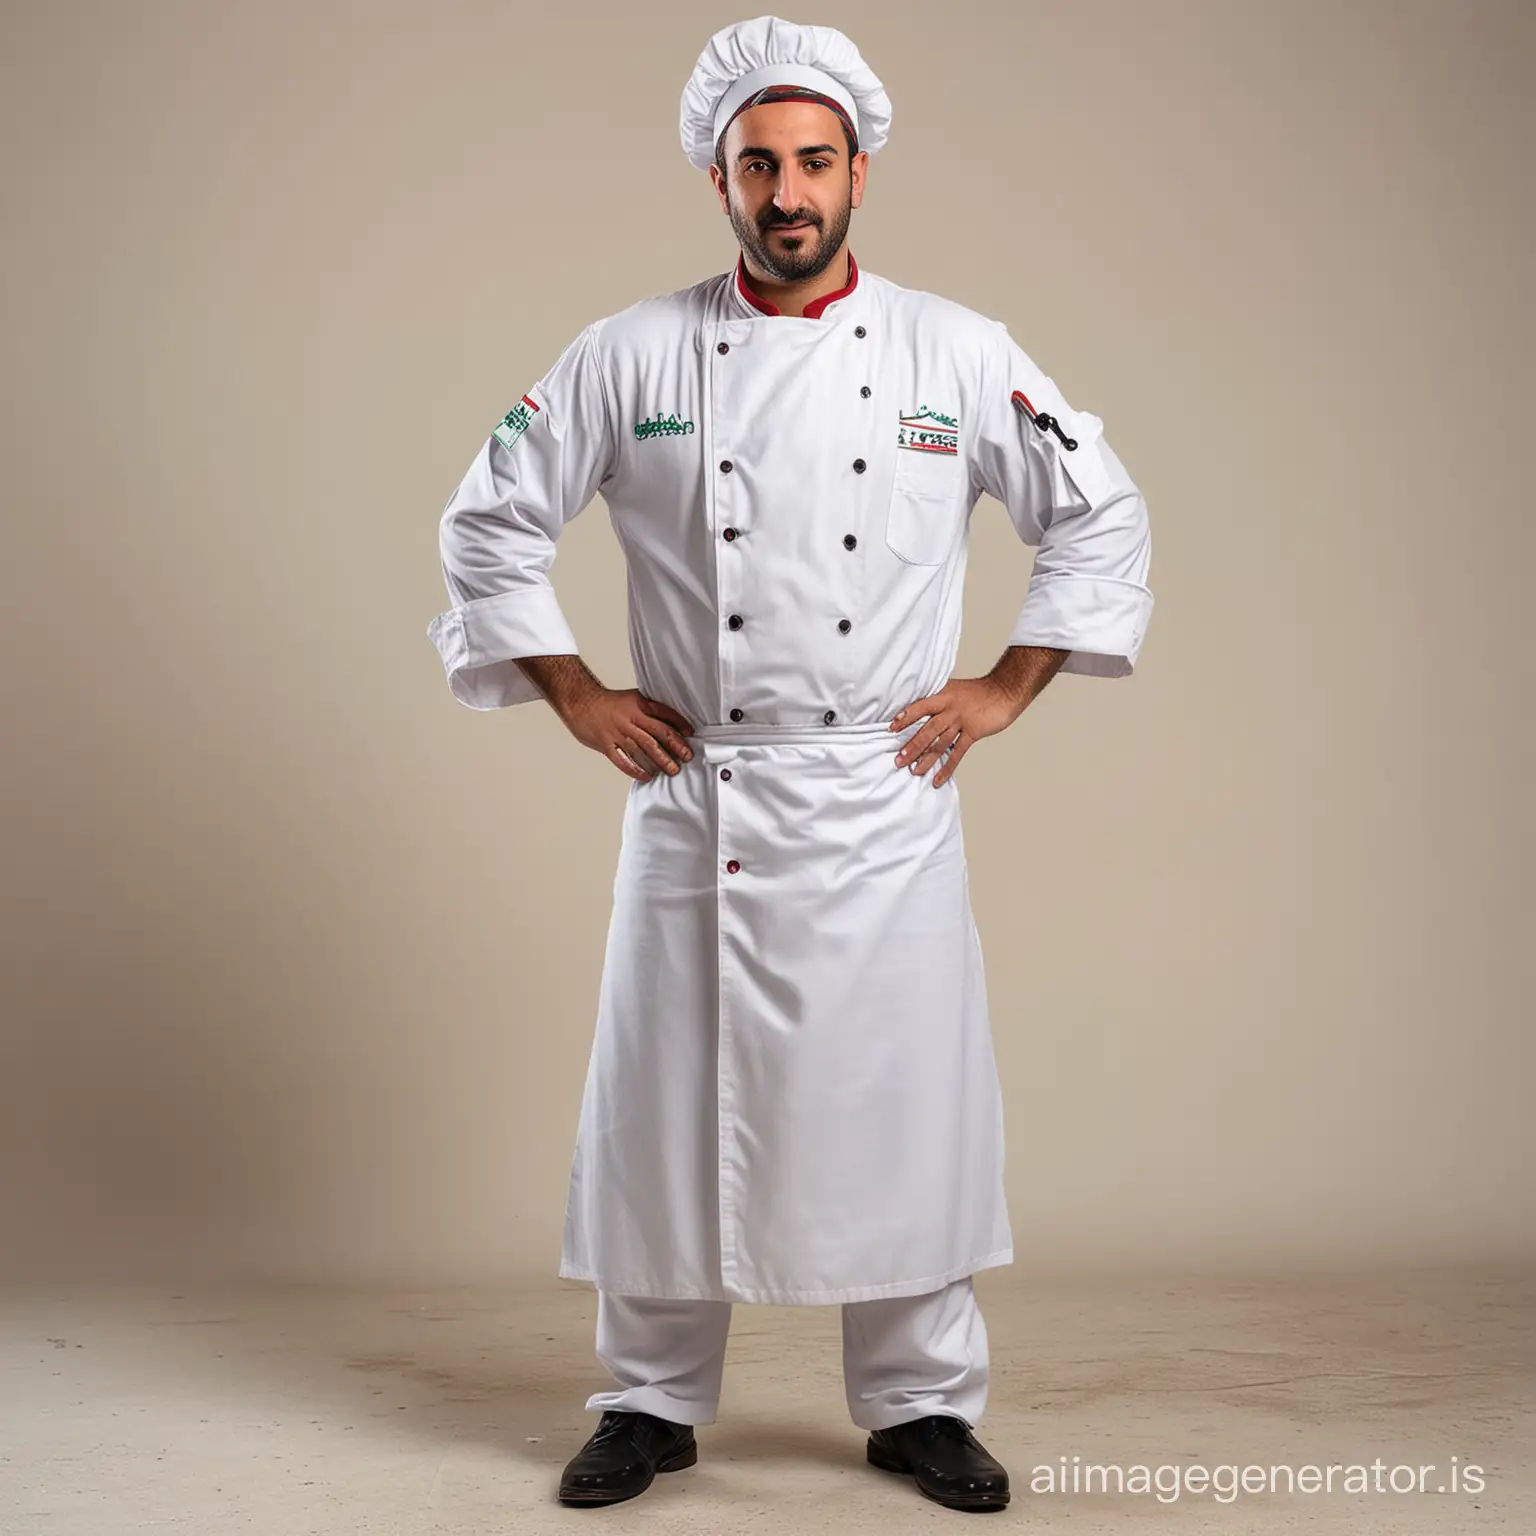 Syrian chef with full body